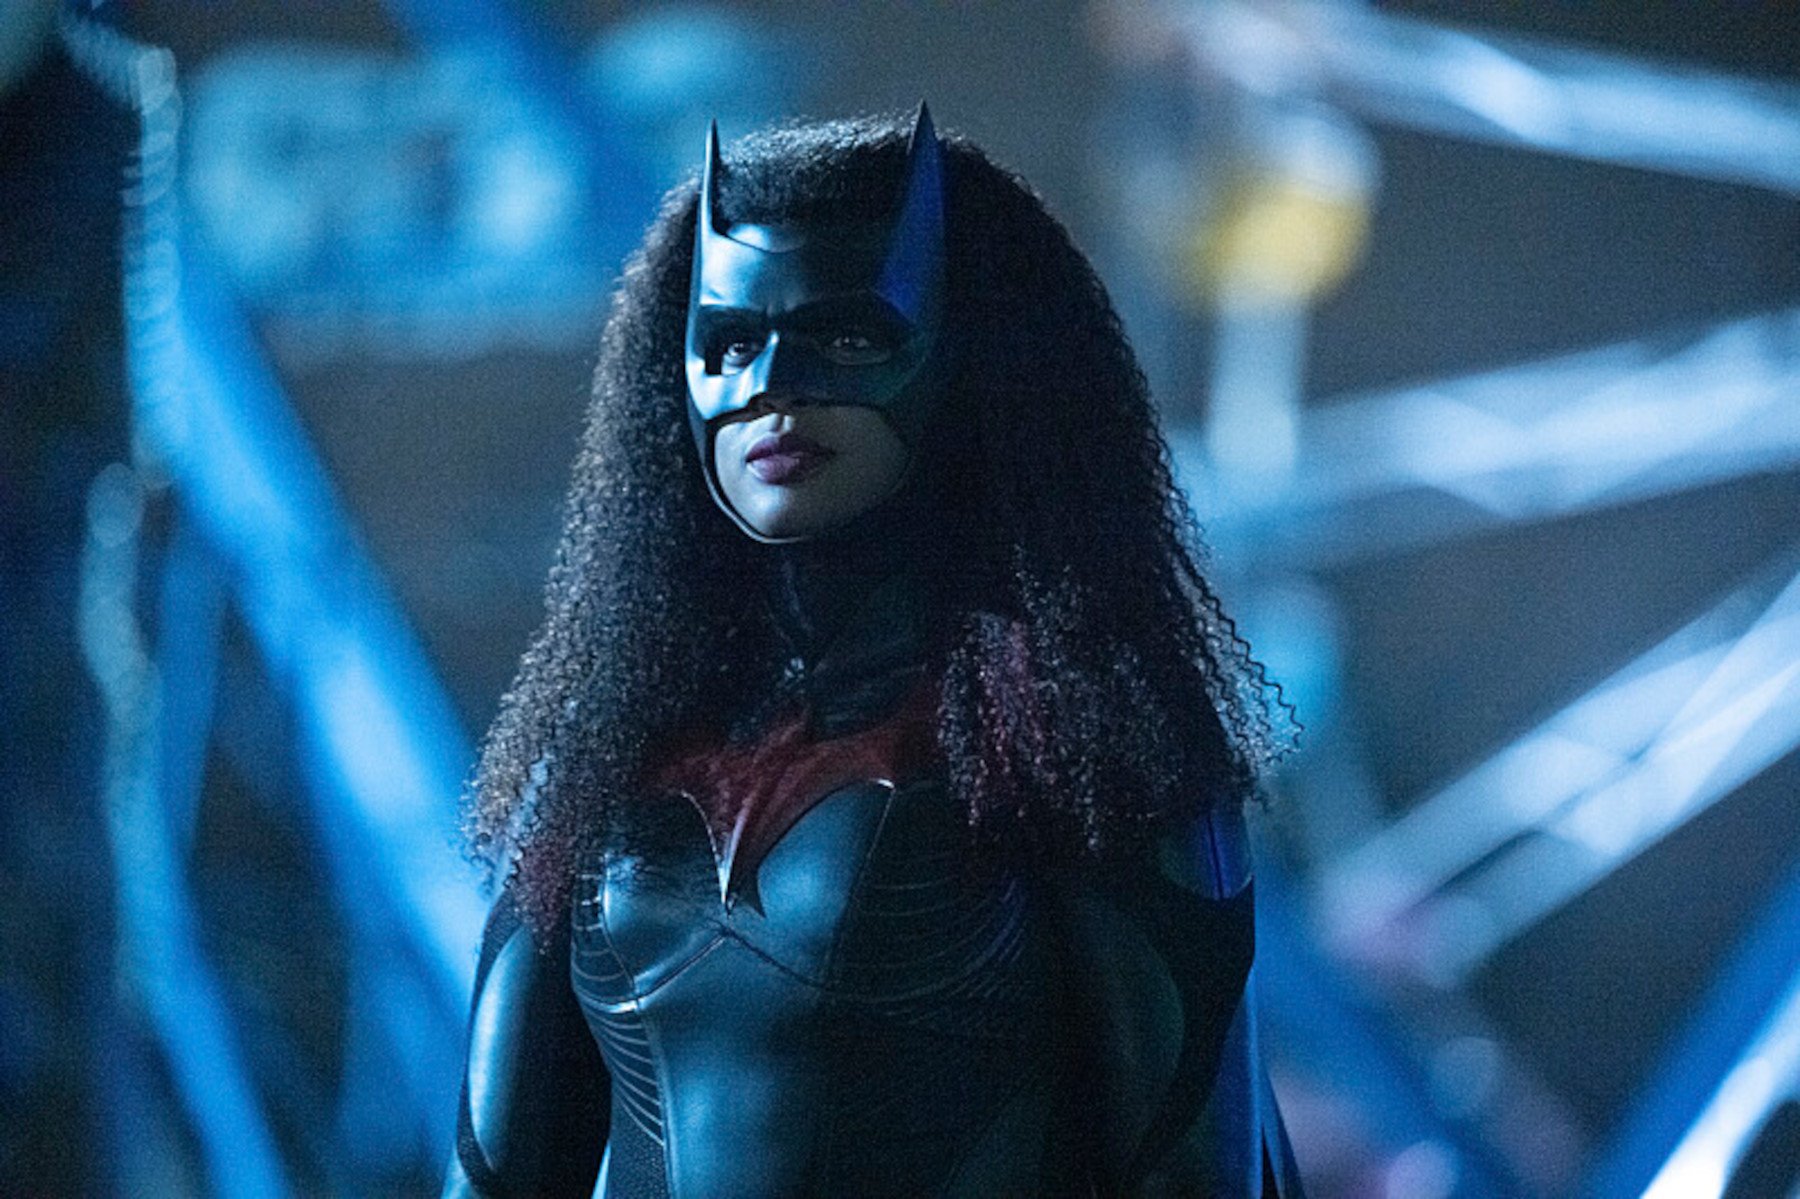 Javicia Leslie in The CW's 'Batwoman,' which was canceled in 2022. She's wearing the batsuit, and her hair is curly.